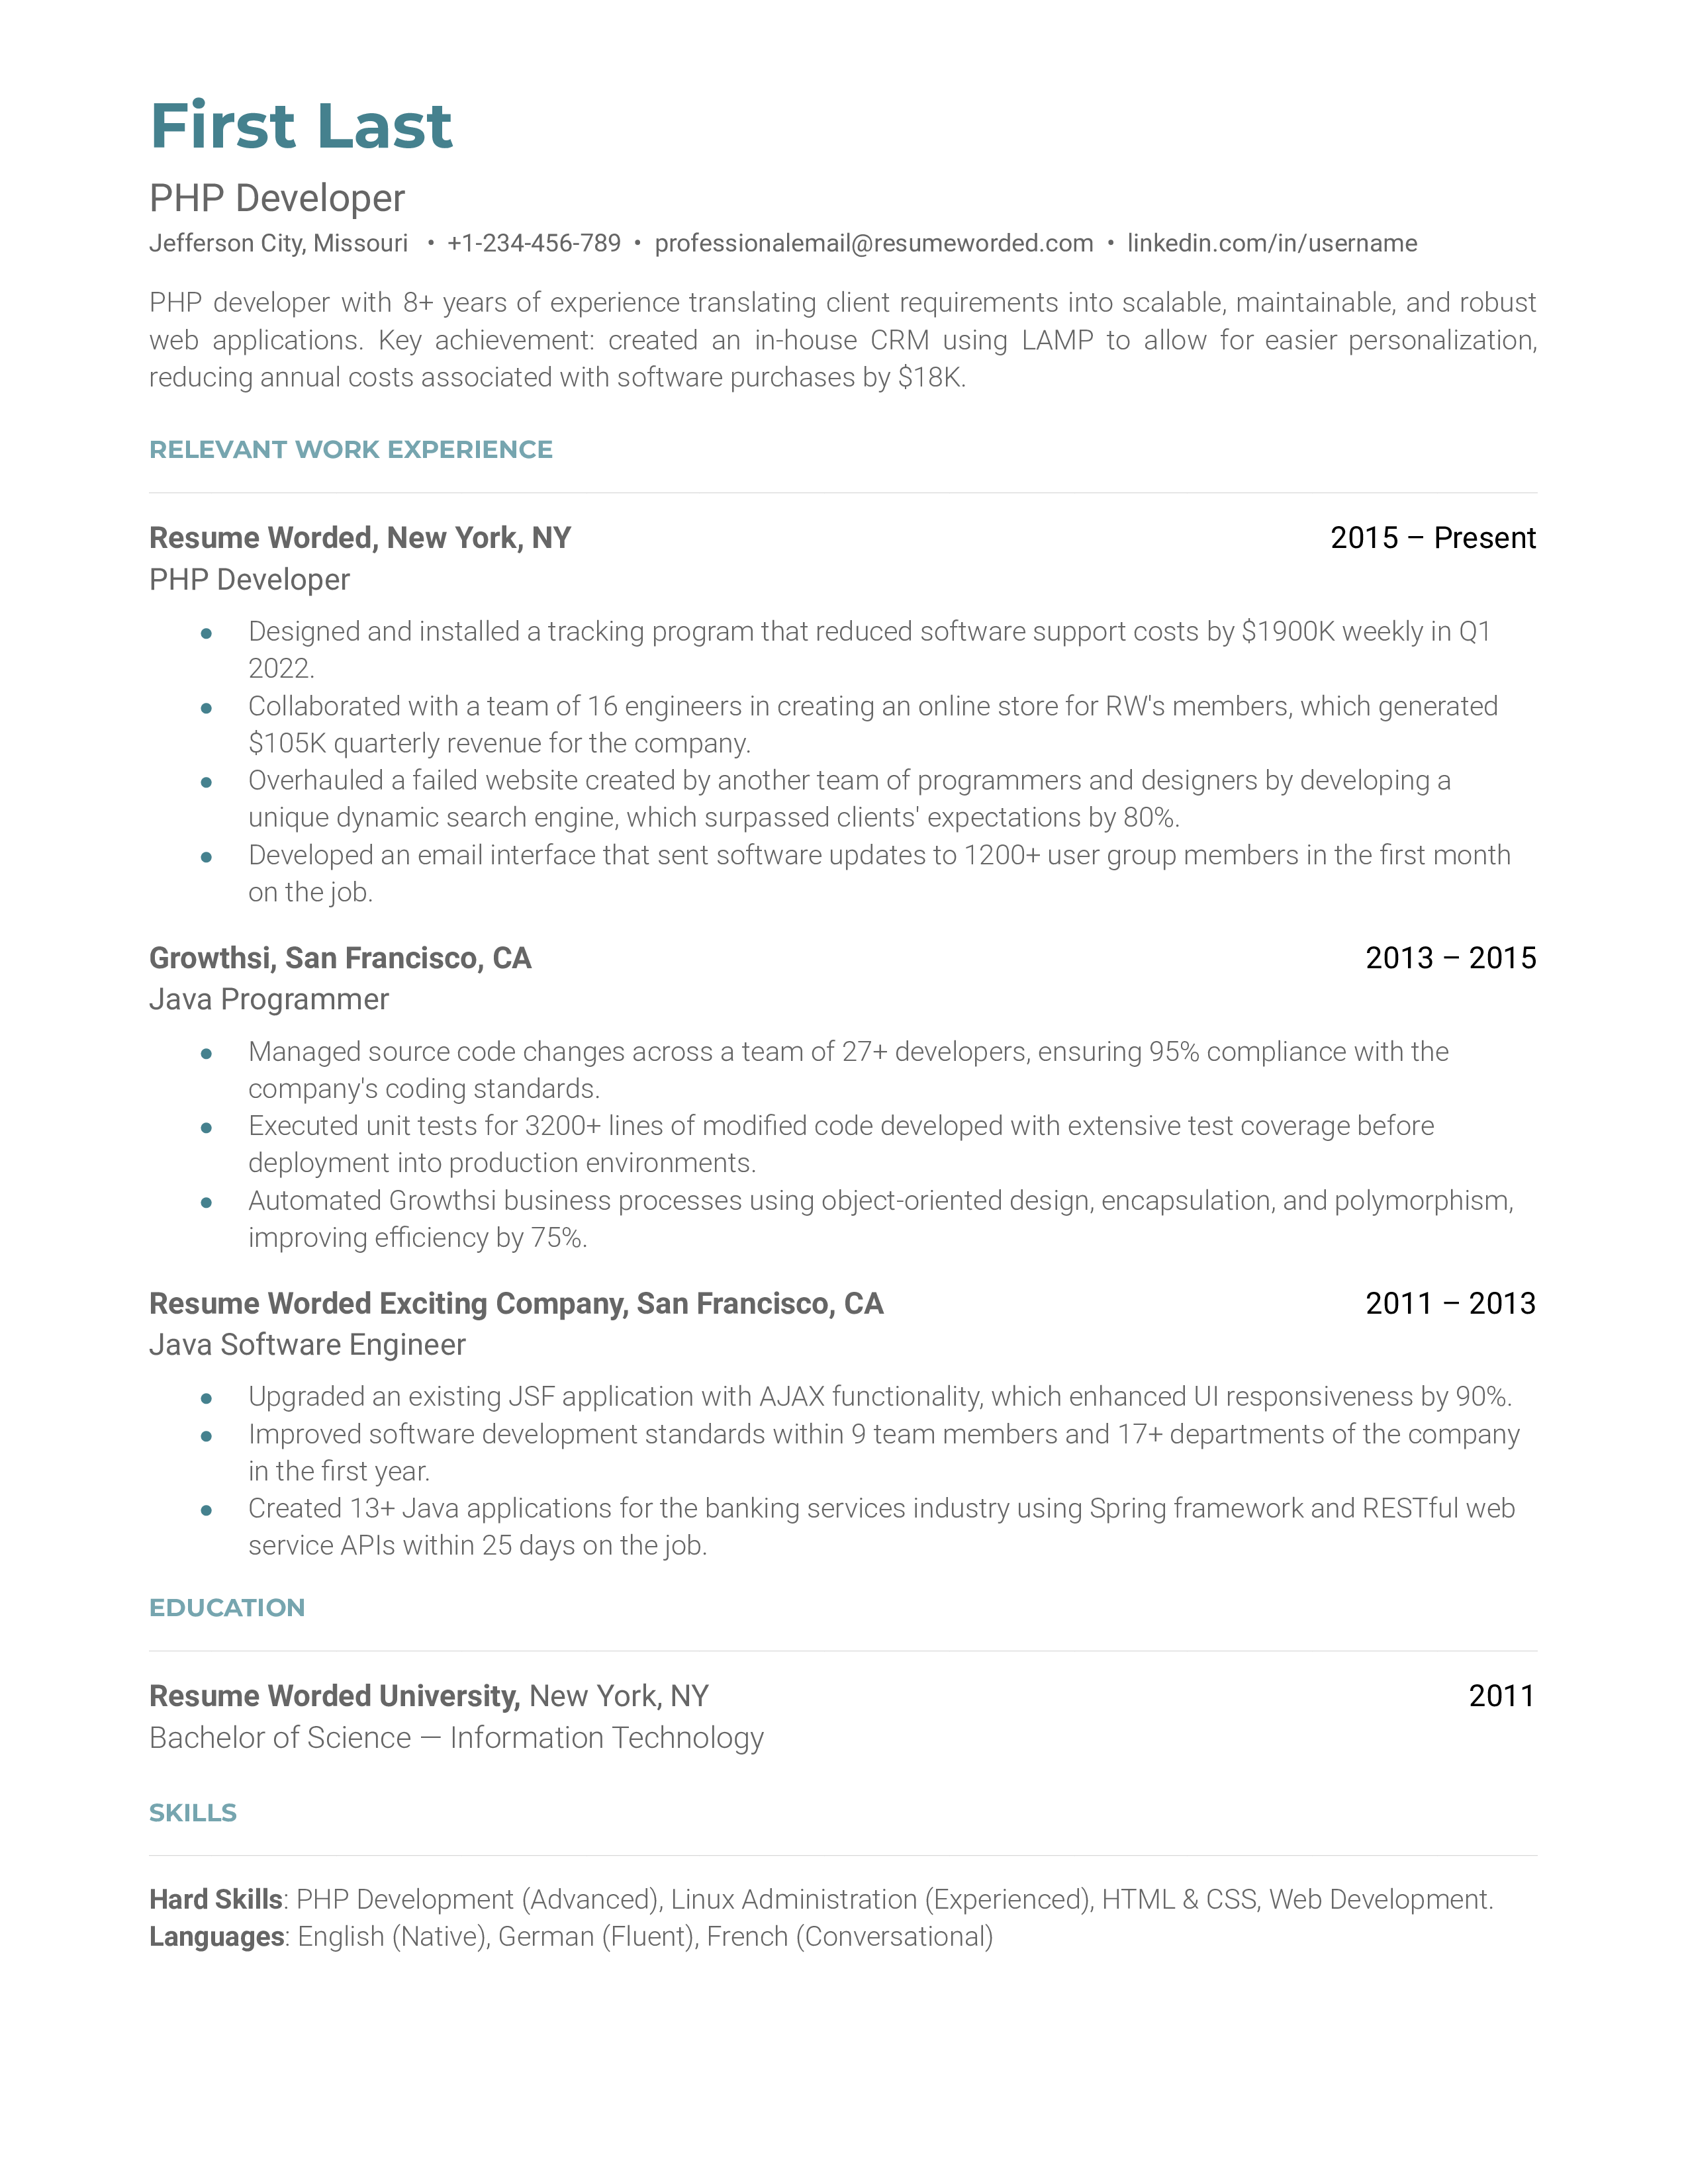 A PHP developer resume template that highlights achievements.